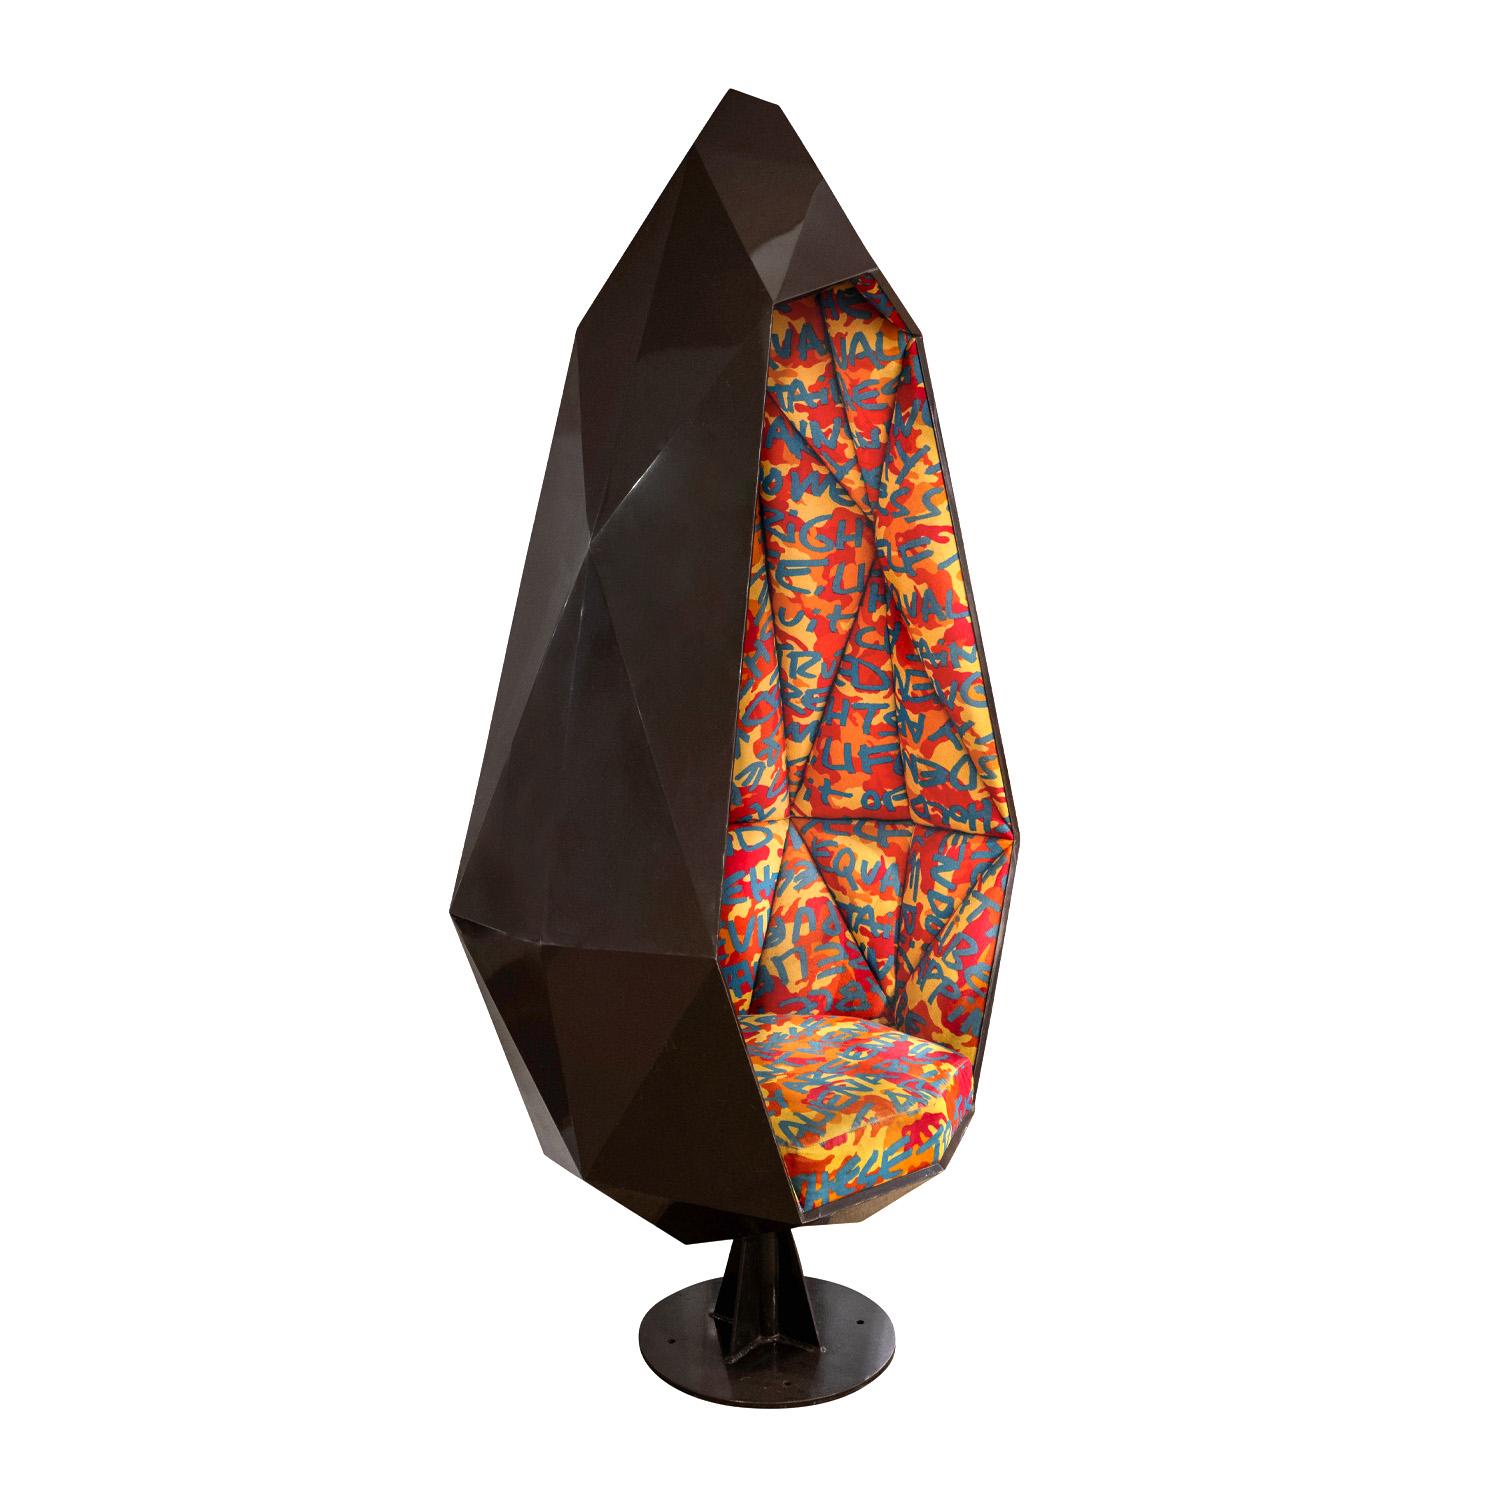 Space Age Stephen Sprouse Rare and Impressive Pod Chair with Iconic Graffiti Fabric 2003